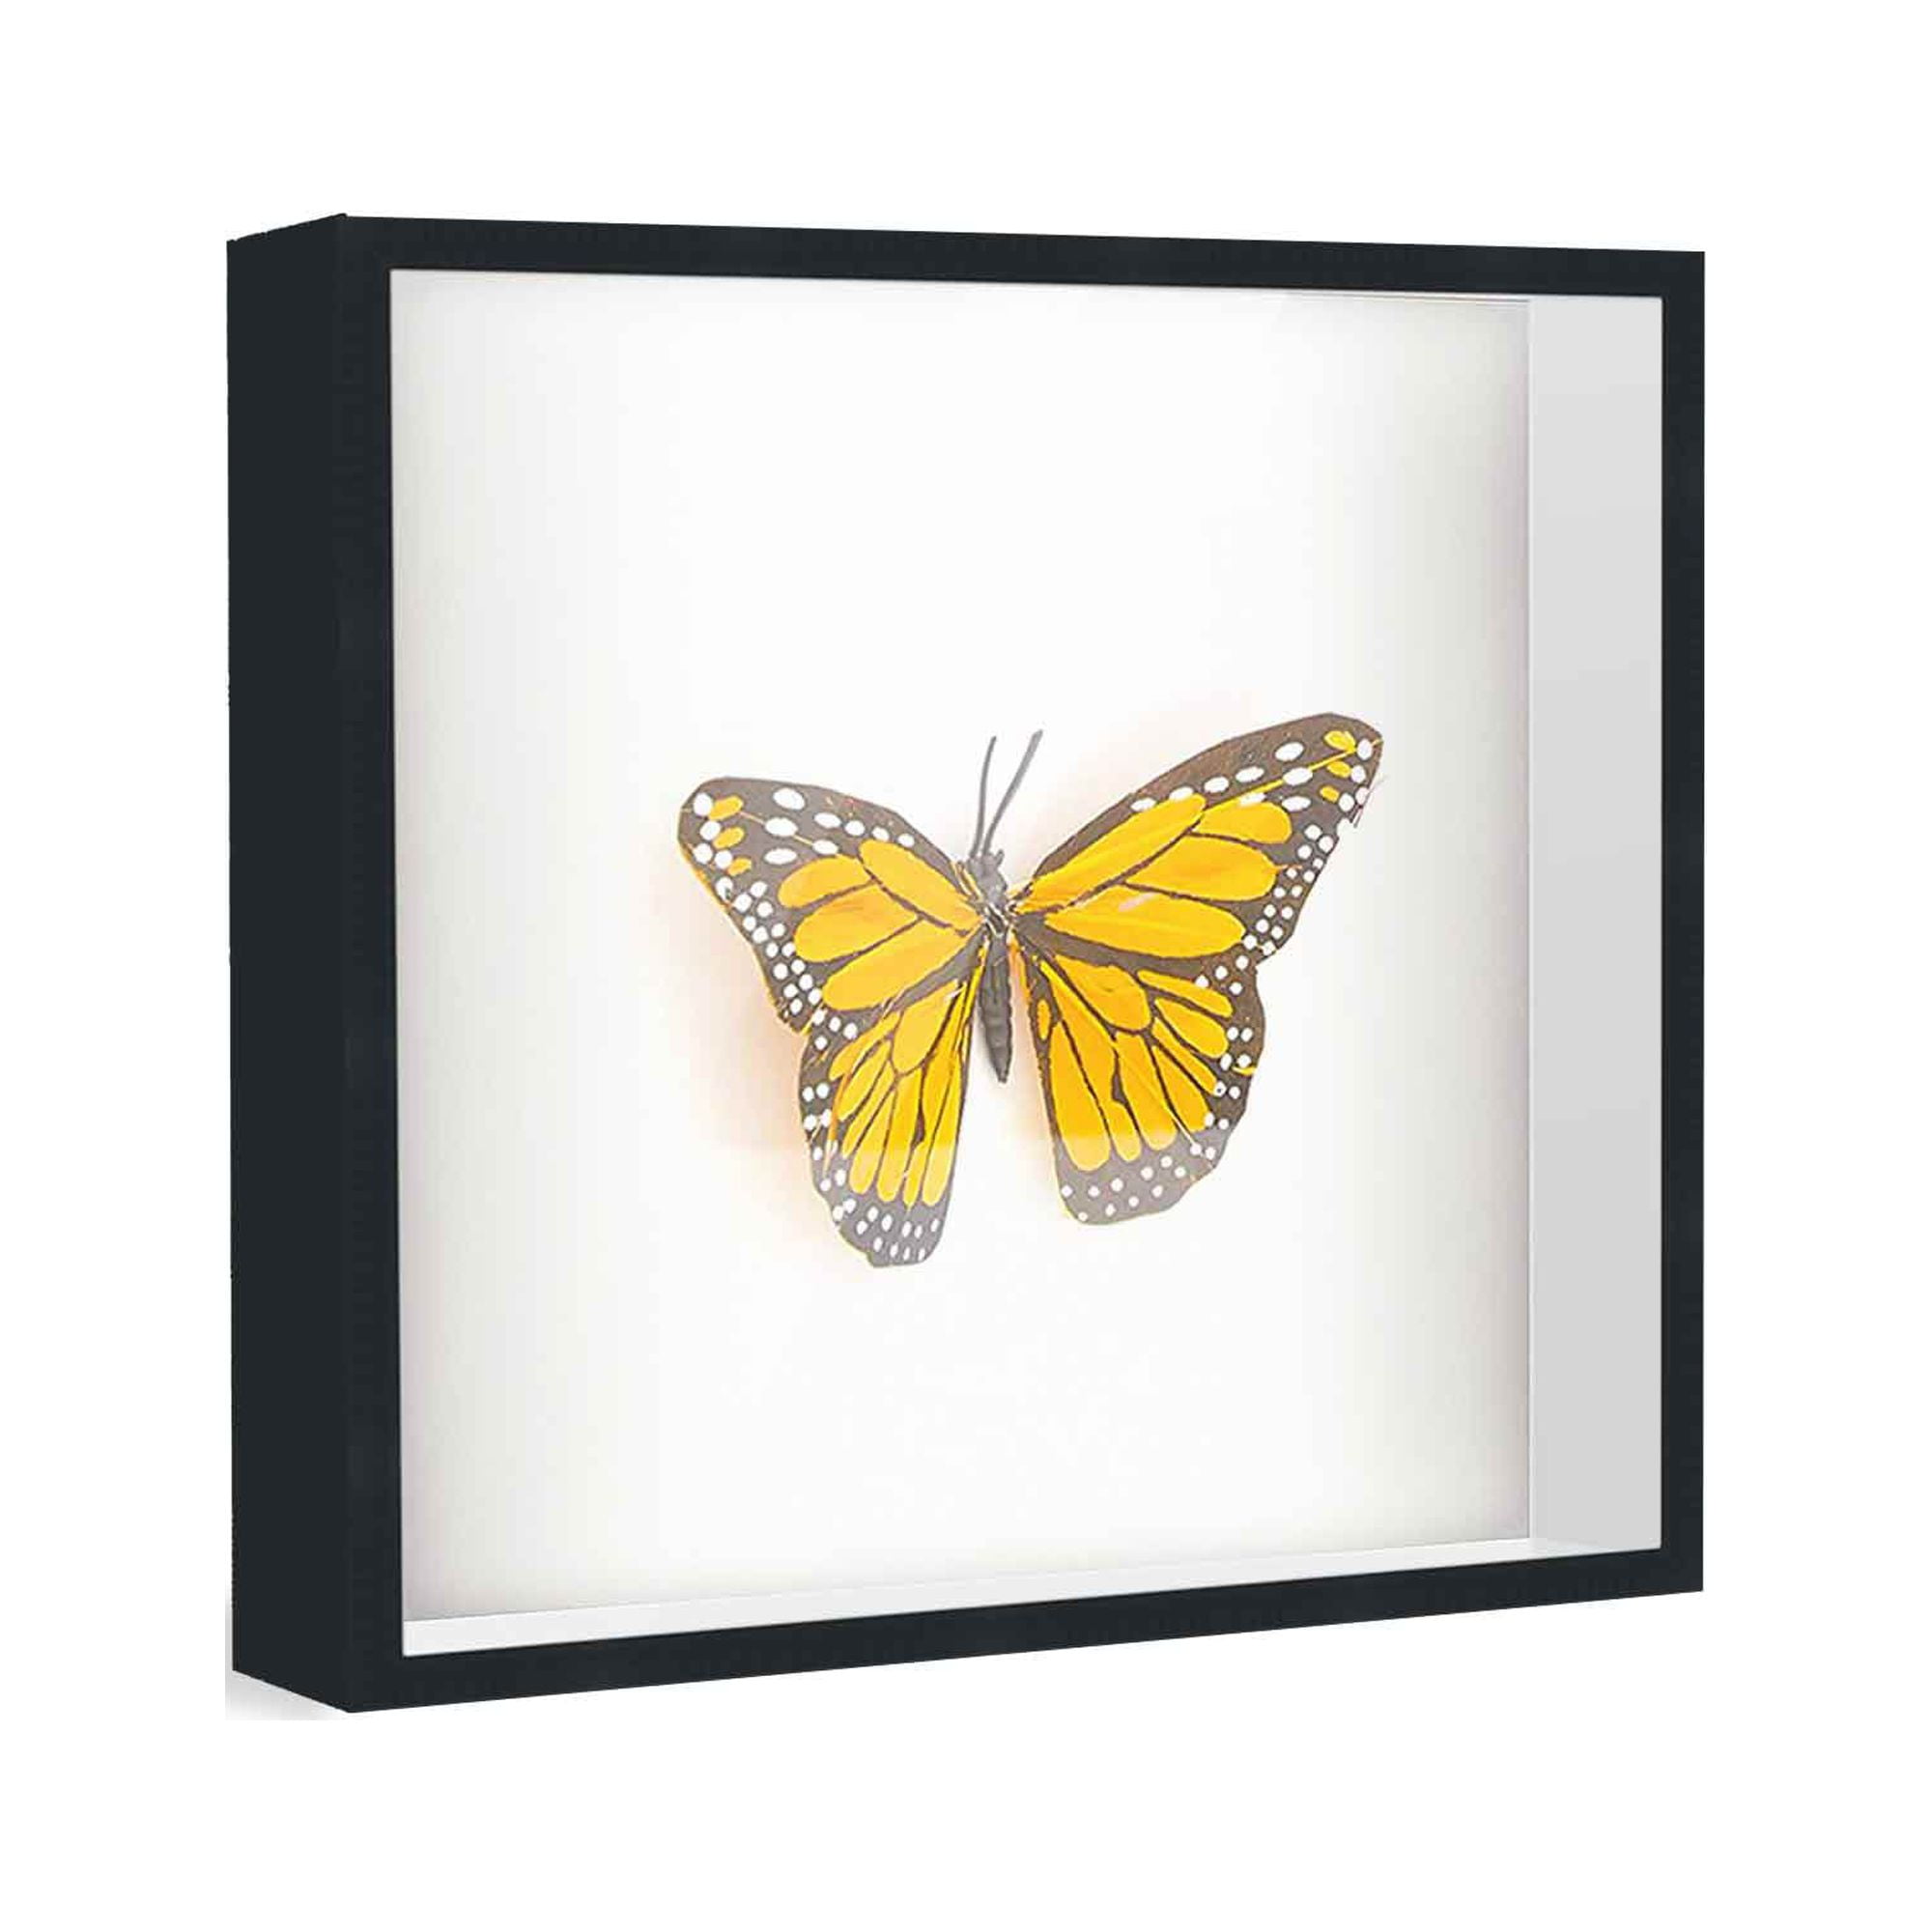 10x10 Shadow Box Frame Black | 1 inches Deep Real Wood Contemporary ...